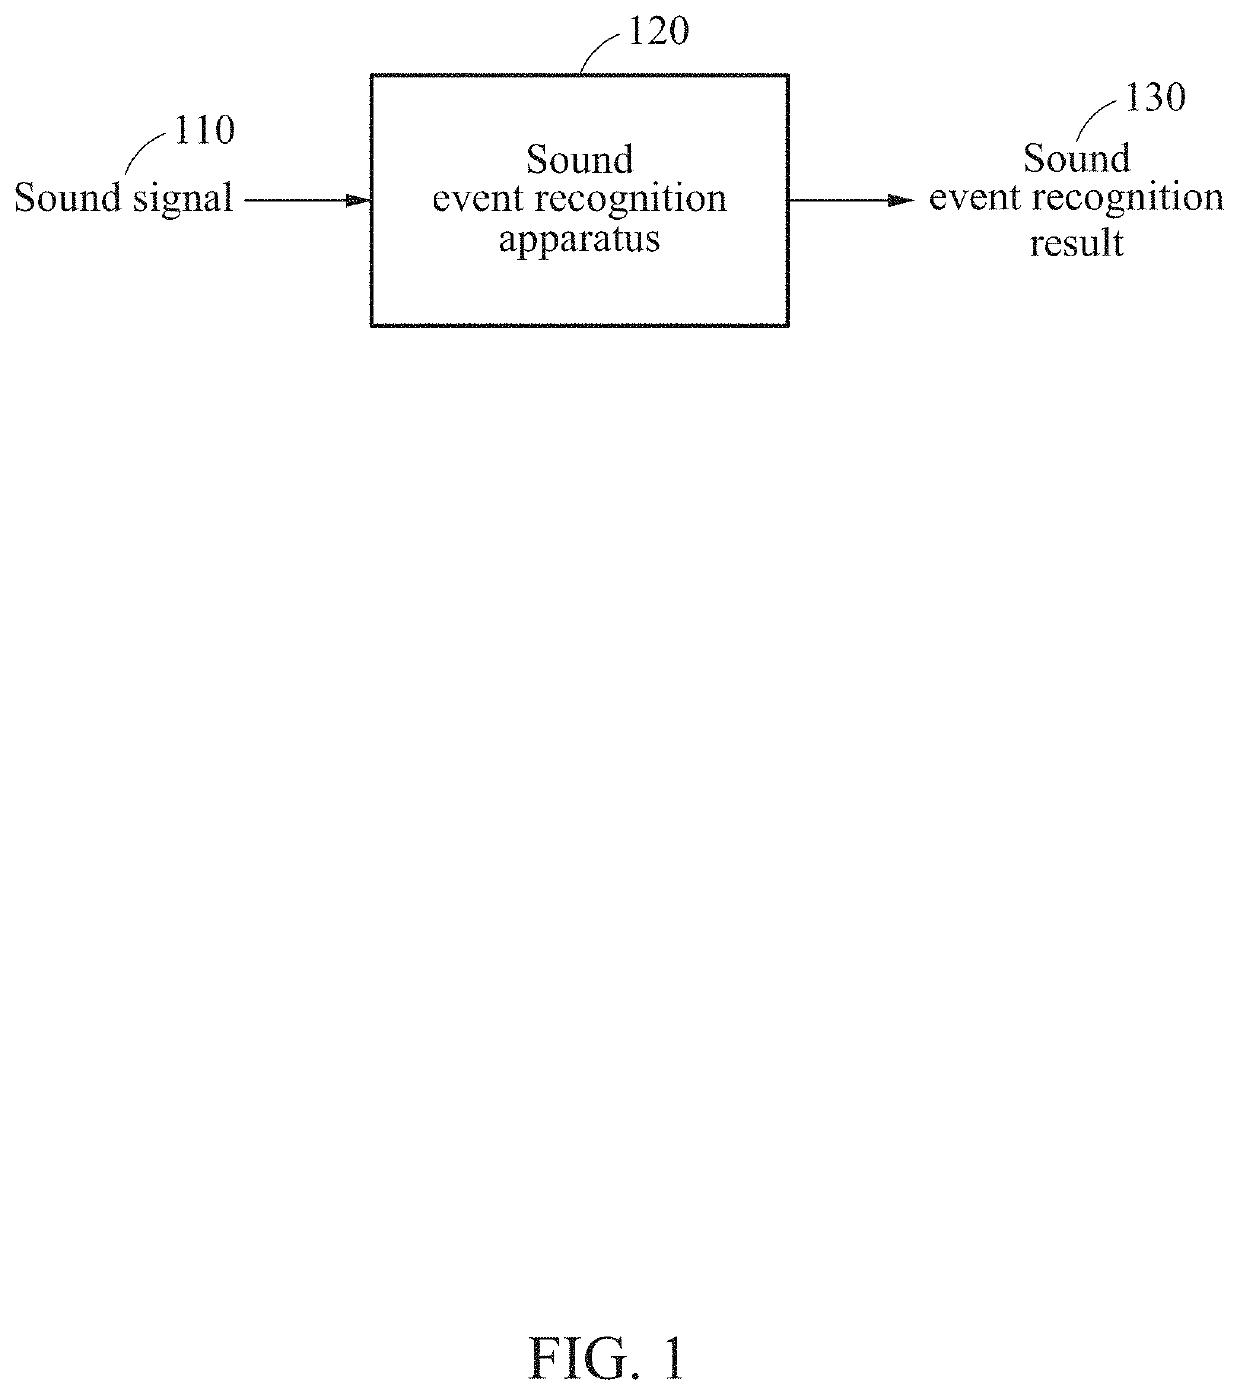 Method and apparatus for recognition of sound events based on convolutional neural network